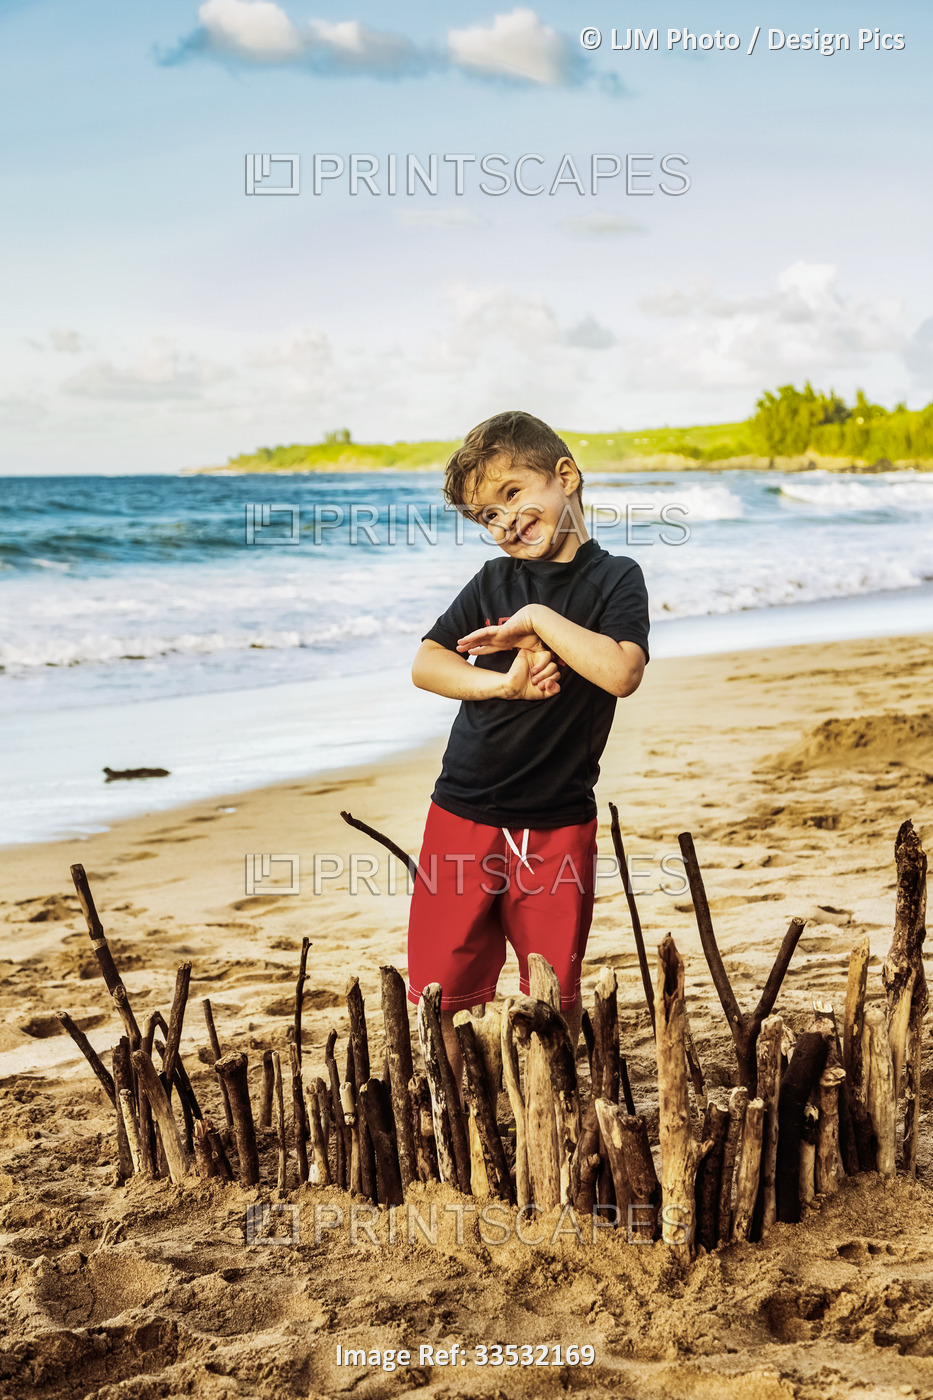 A young boy stands on the beach and proudly displays his creation in the sand ...